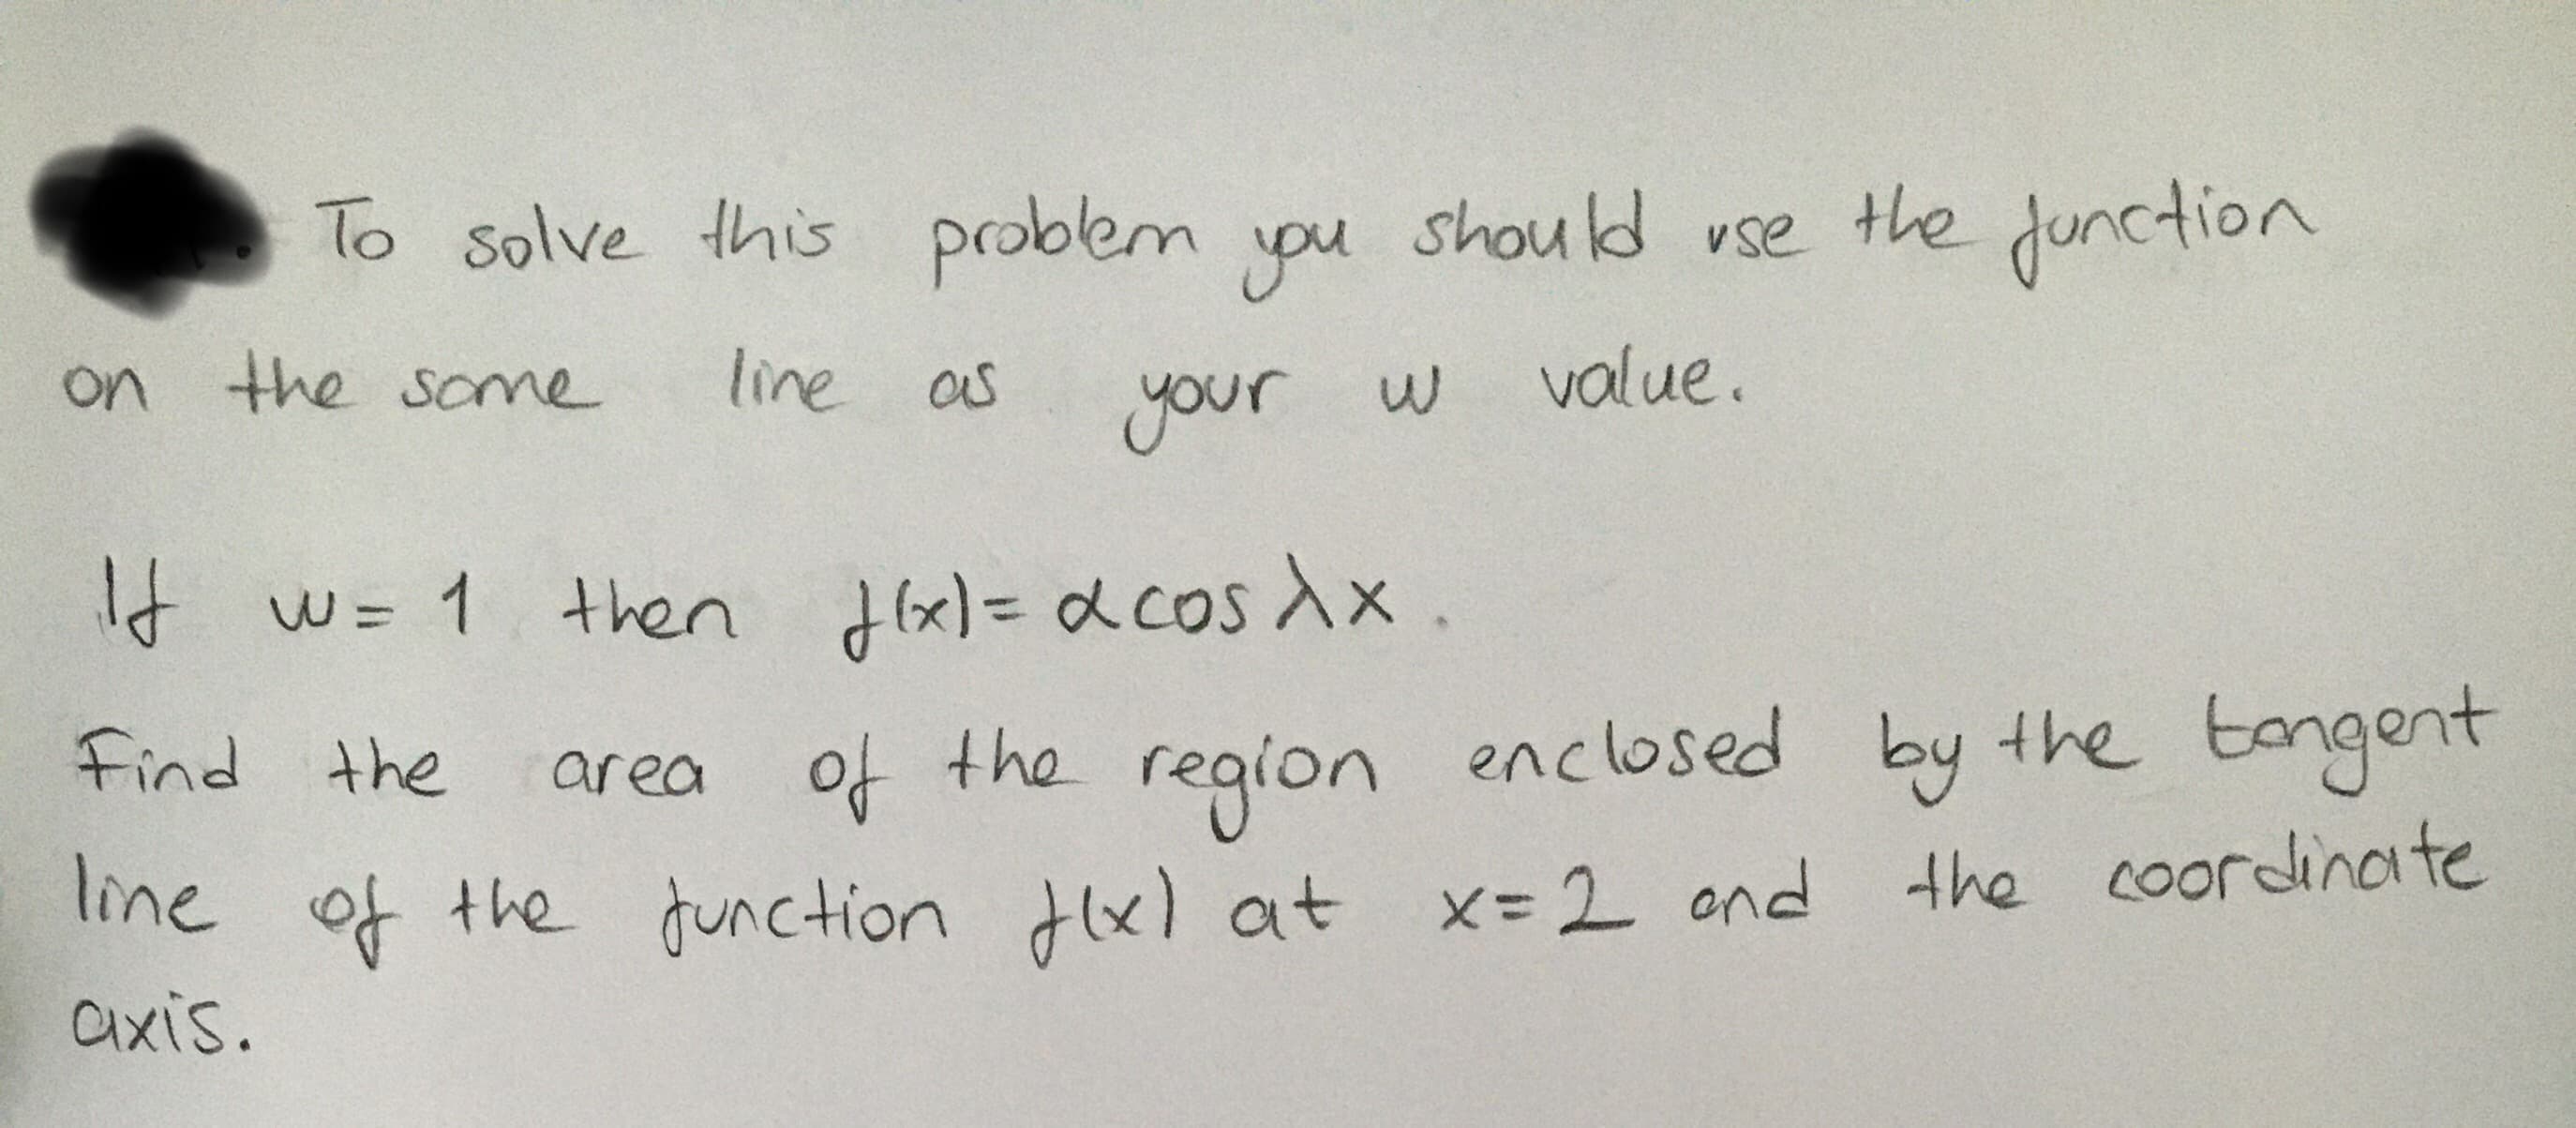 To solve this problem you
should vse
the junction
on the same
line as
your w
value.
It
d w= 1 then d(x)= dcos Xx .
H(x)=Ddcosdx
area of the enclosed by the tangent
the coordinate
Find the
region
line of the function dlx) at x-2 ond
axis.
